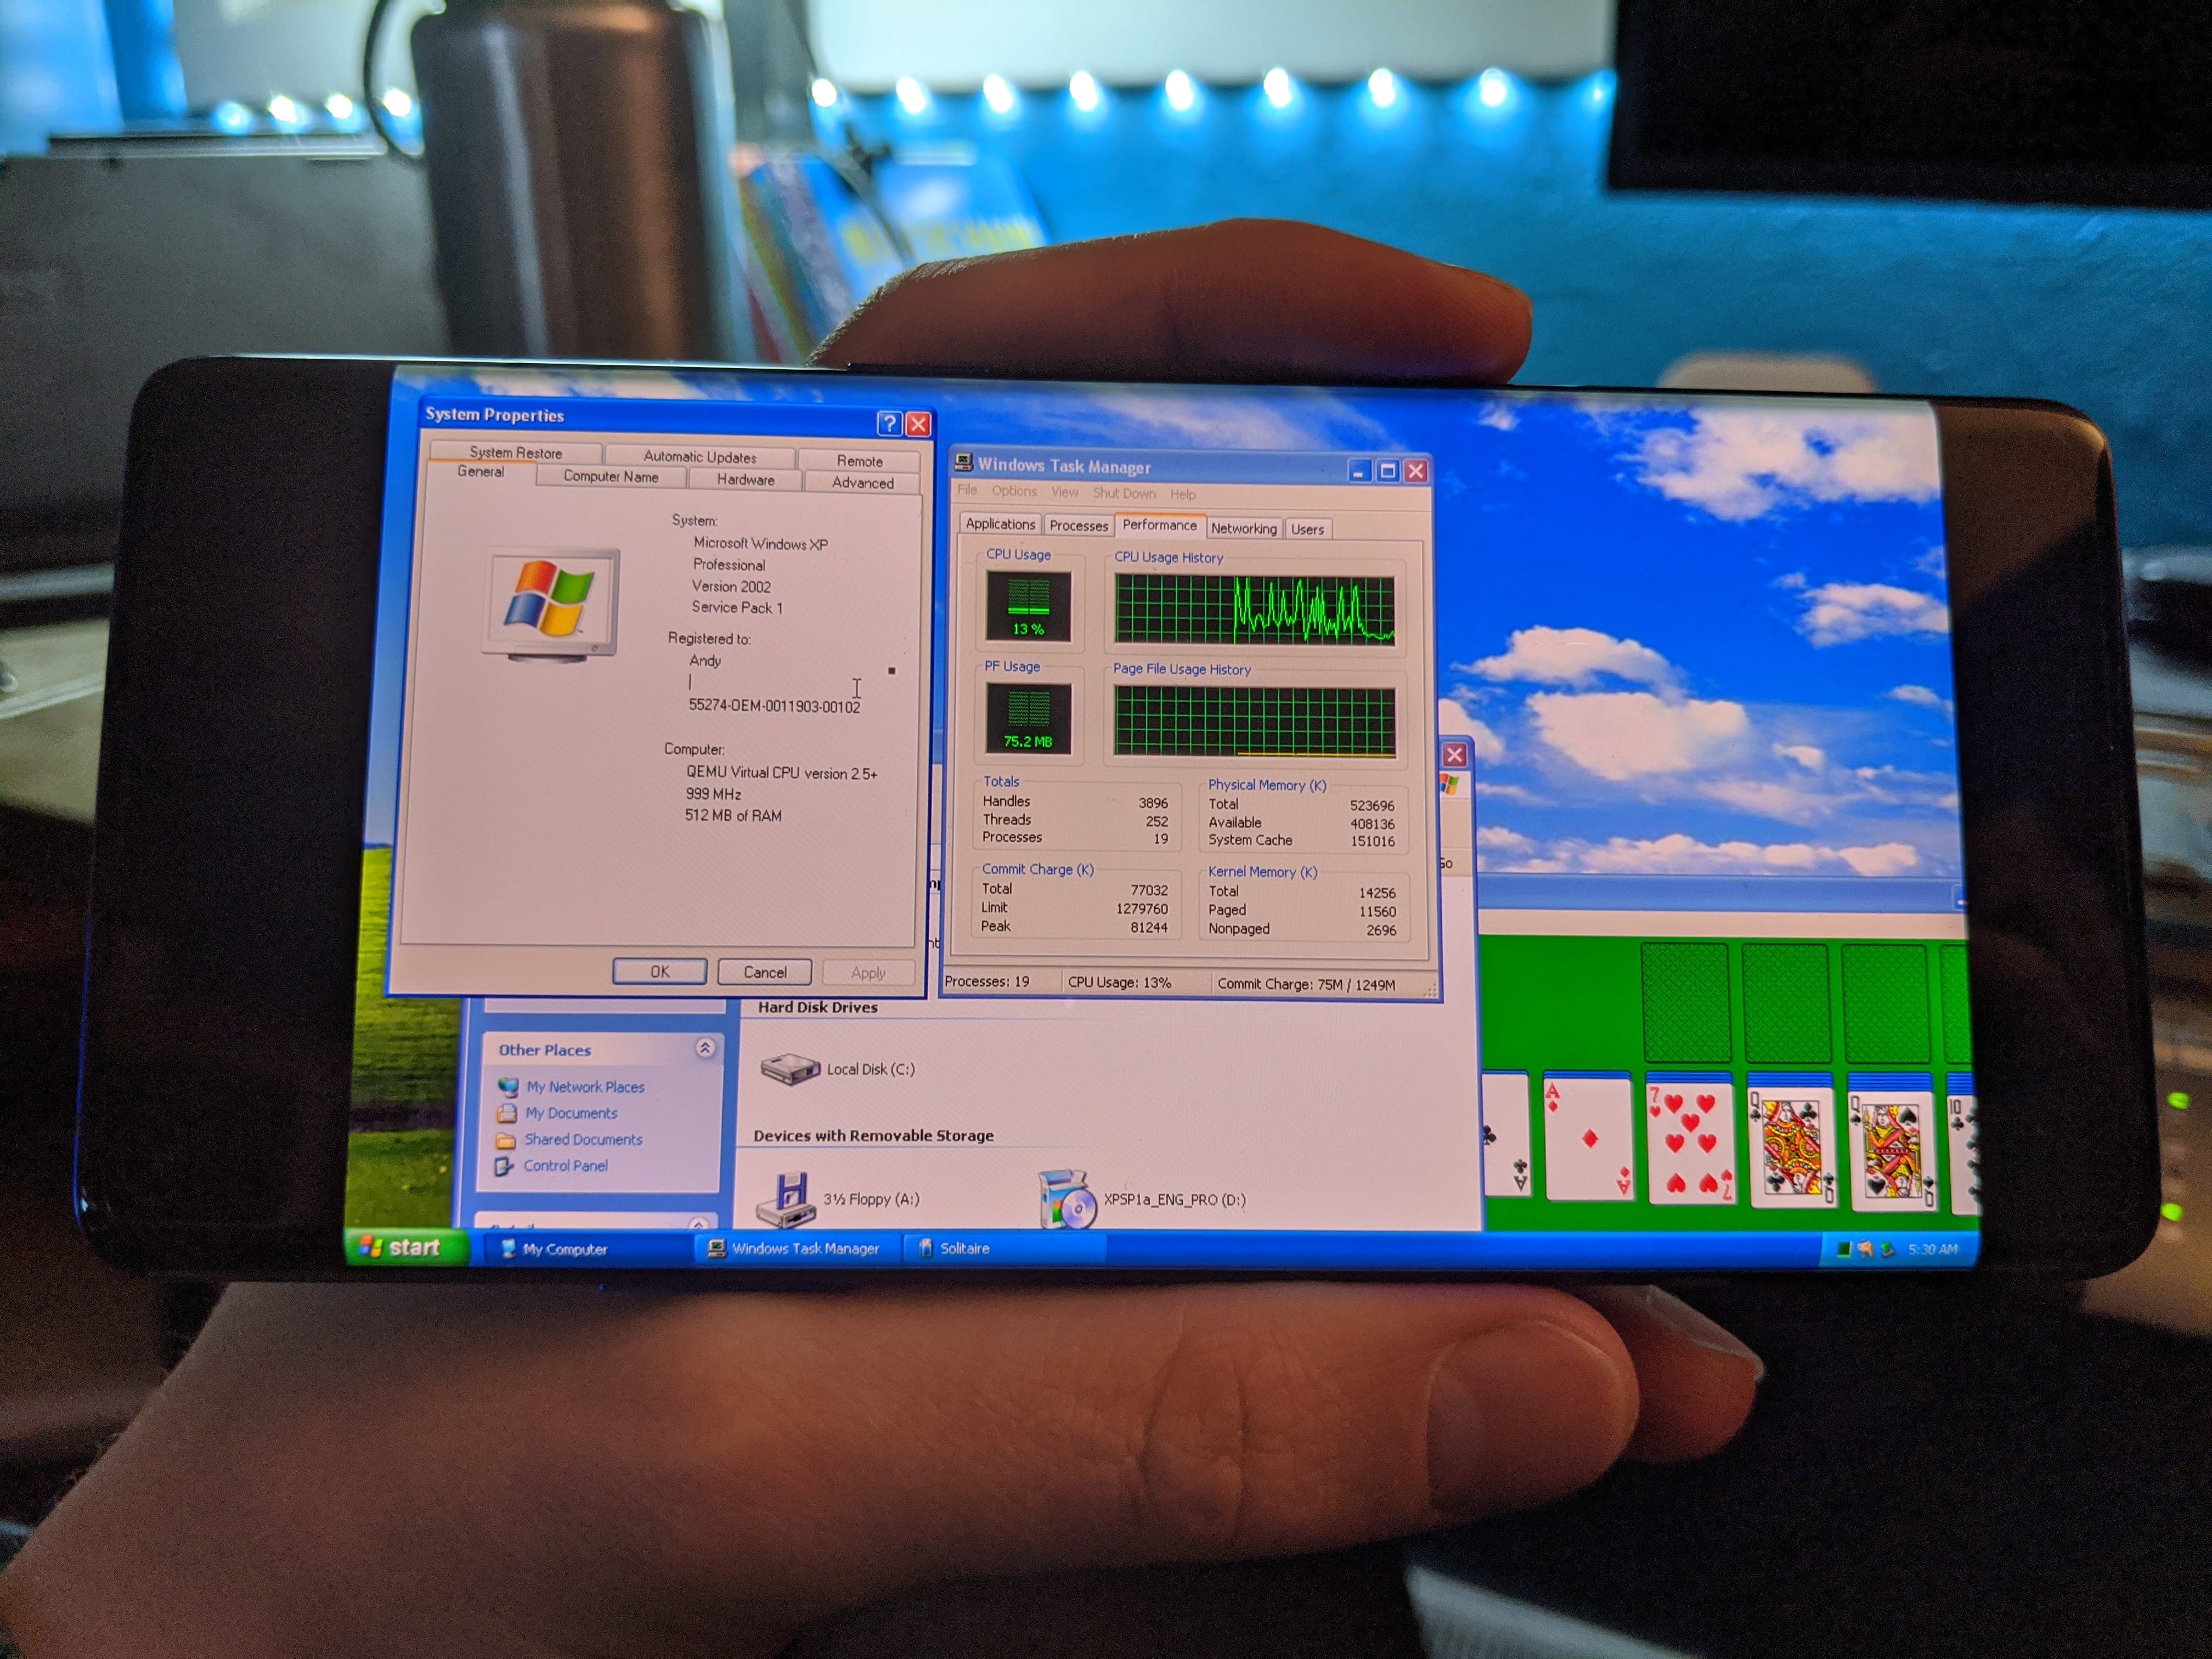 Running Windows Xp On Android No Rooting Or Custom Modifications By Andrew Letourneau Medium